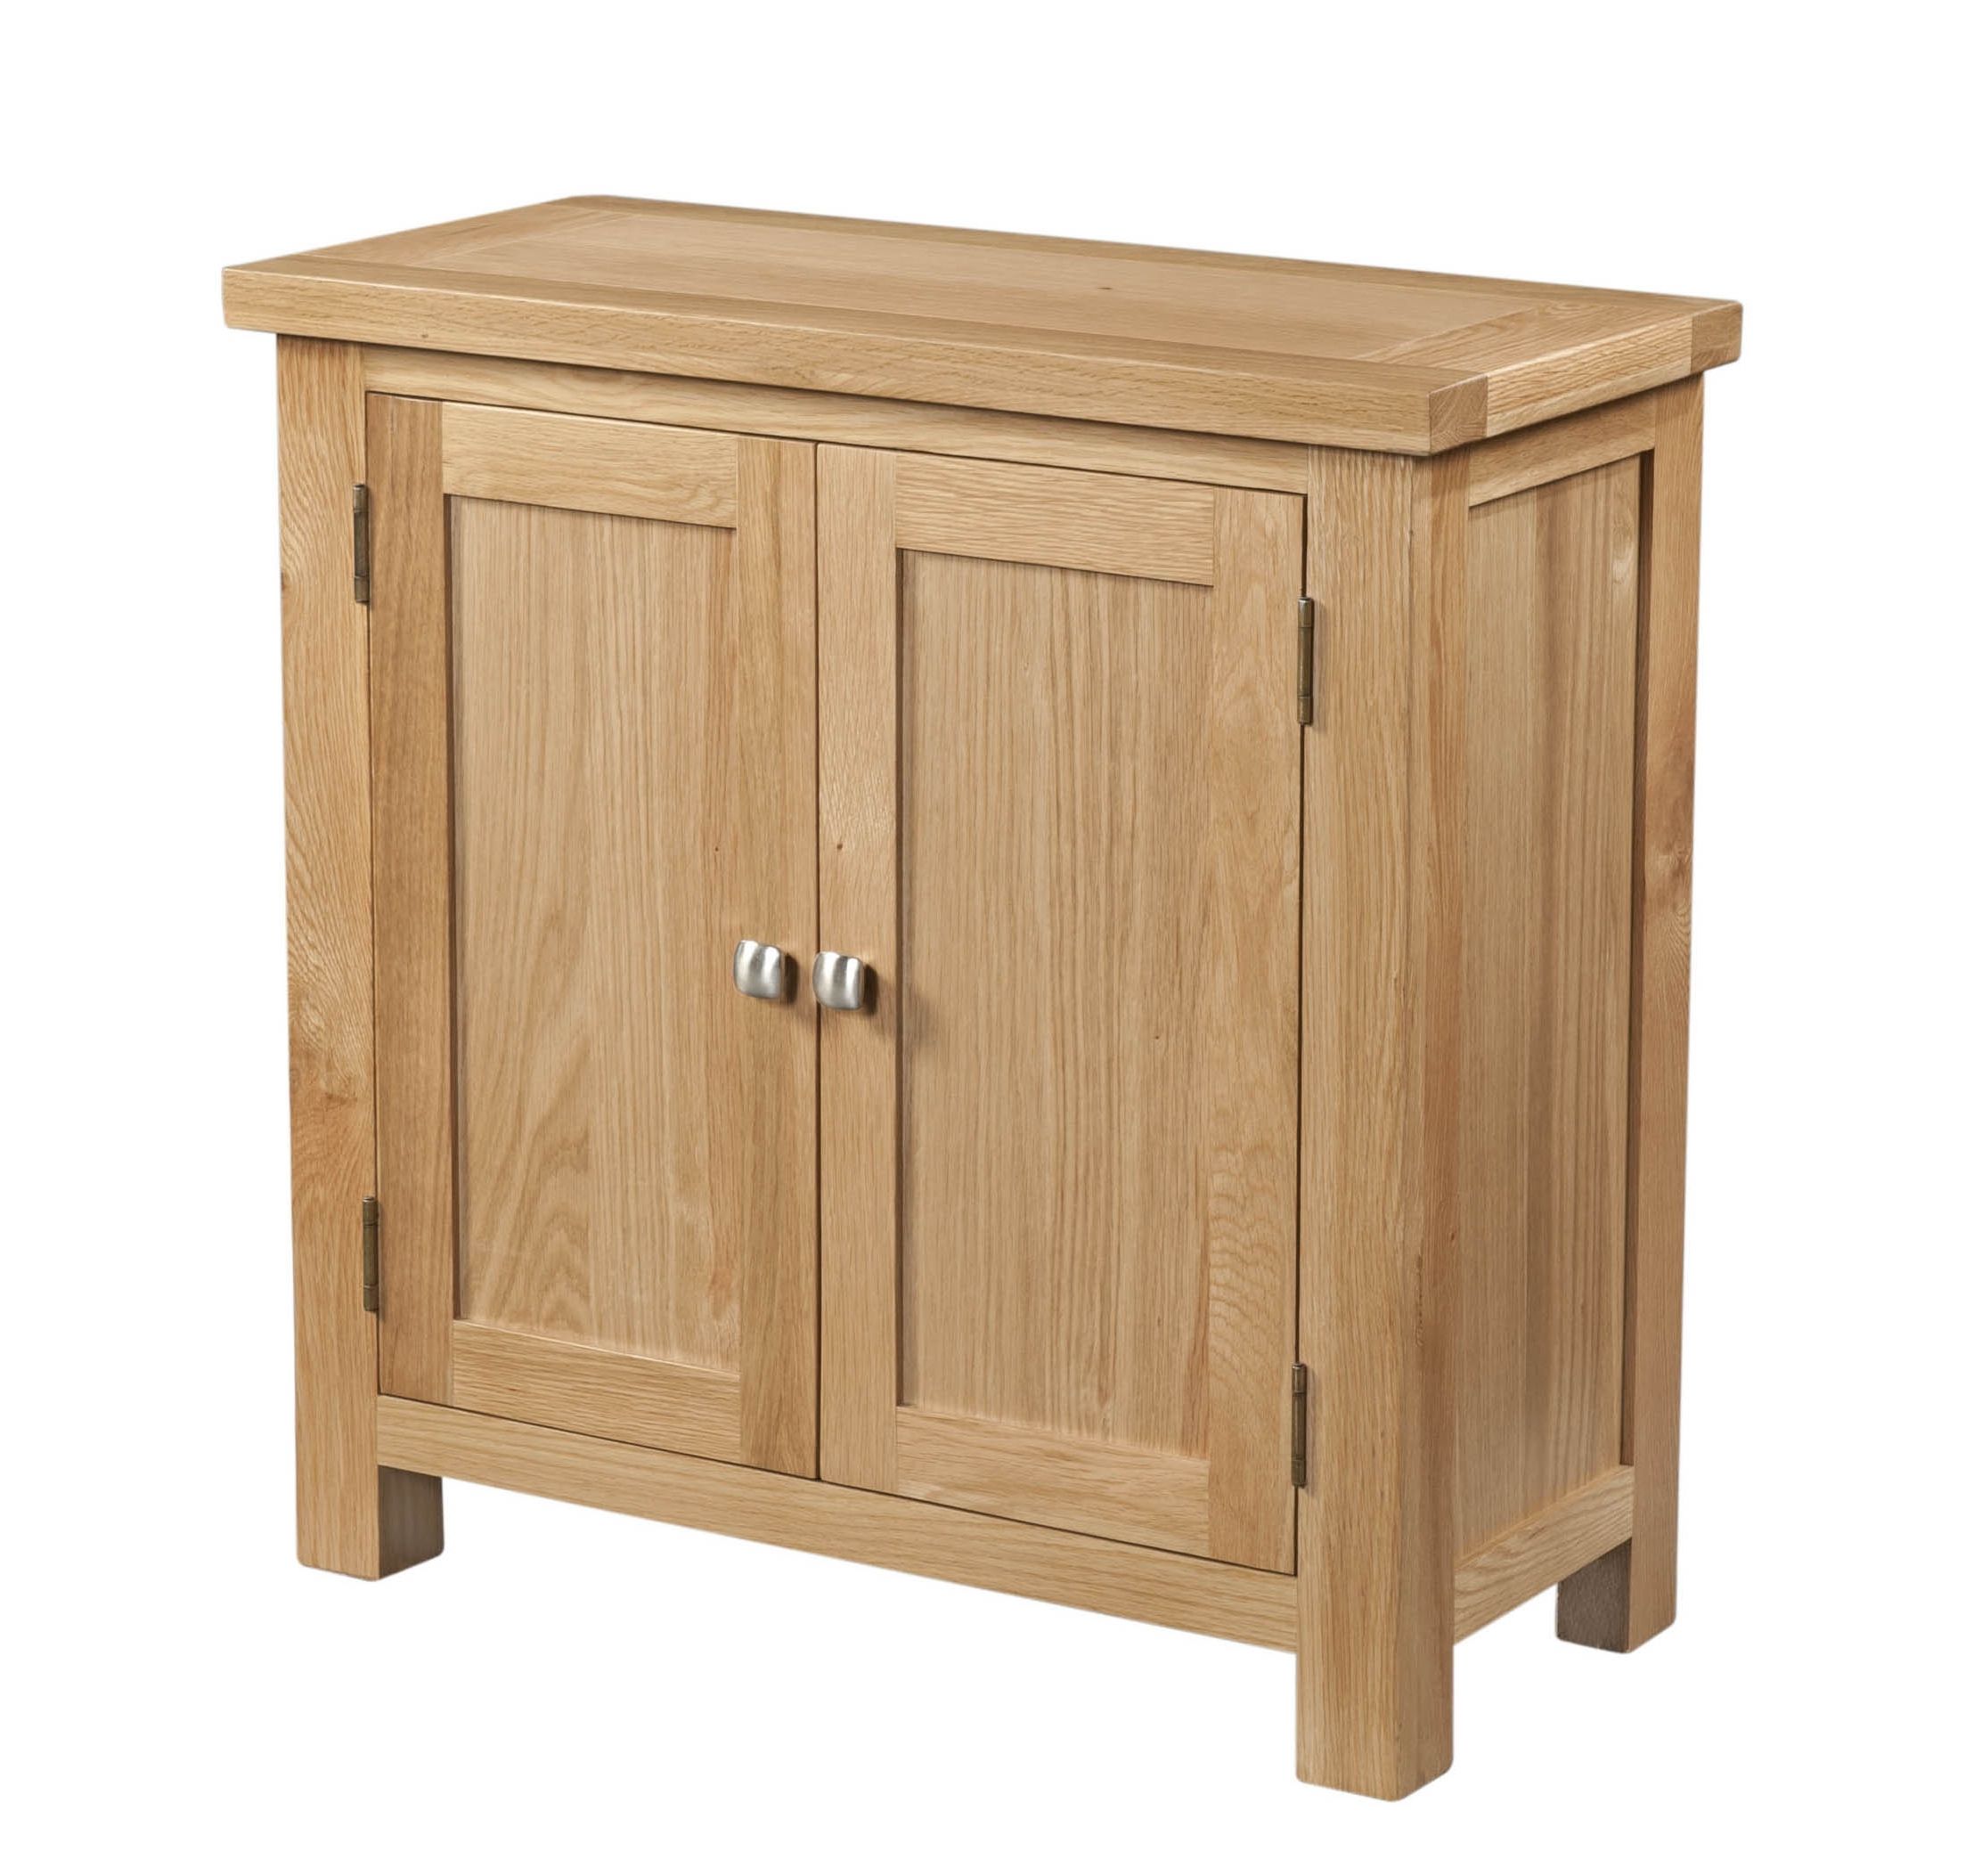 Dorset Dining & Occasional : Dorset Small Oak Cabinet With 2 Within Well Known Small Oak Cupboard (View 11 of 15)